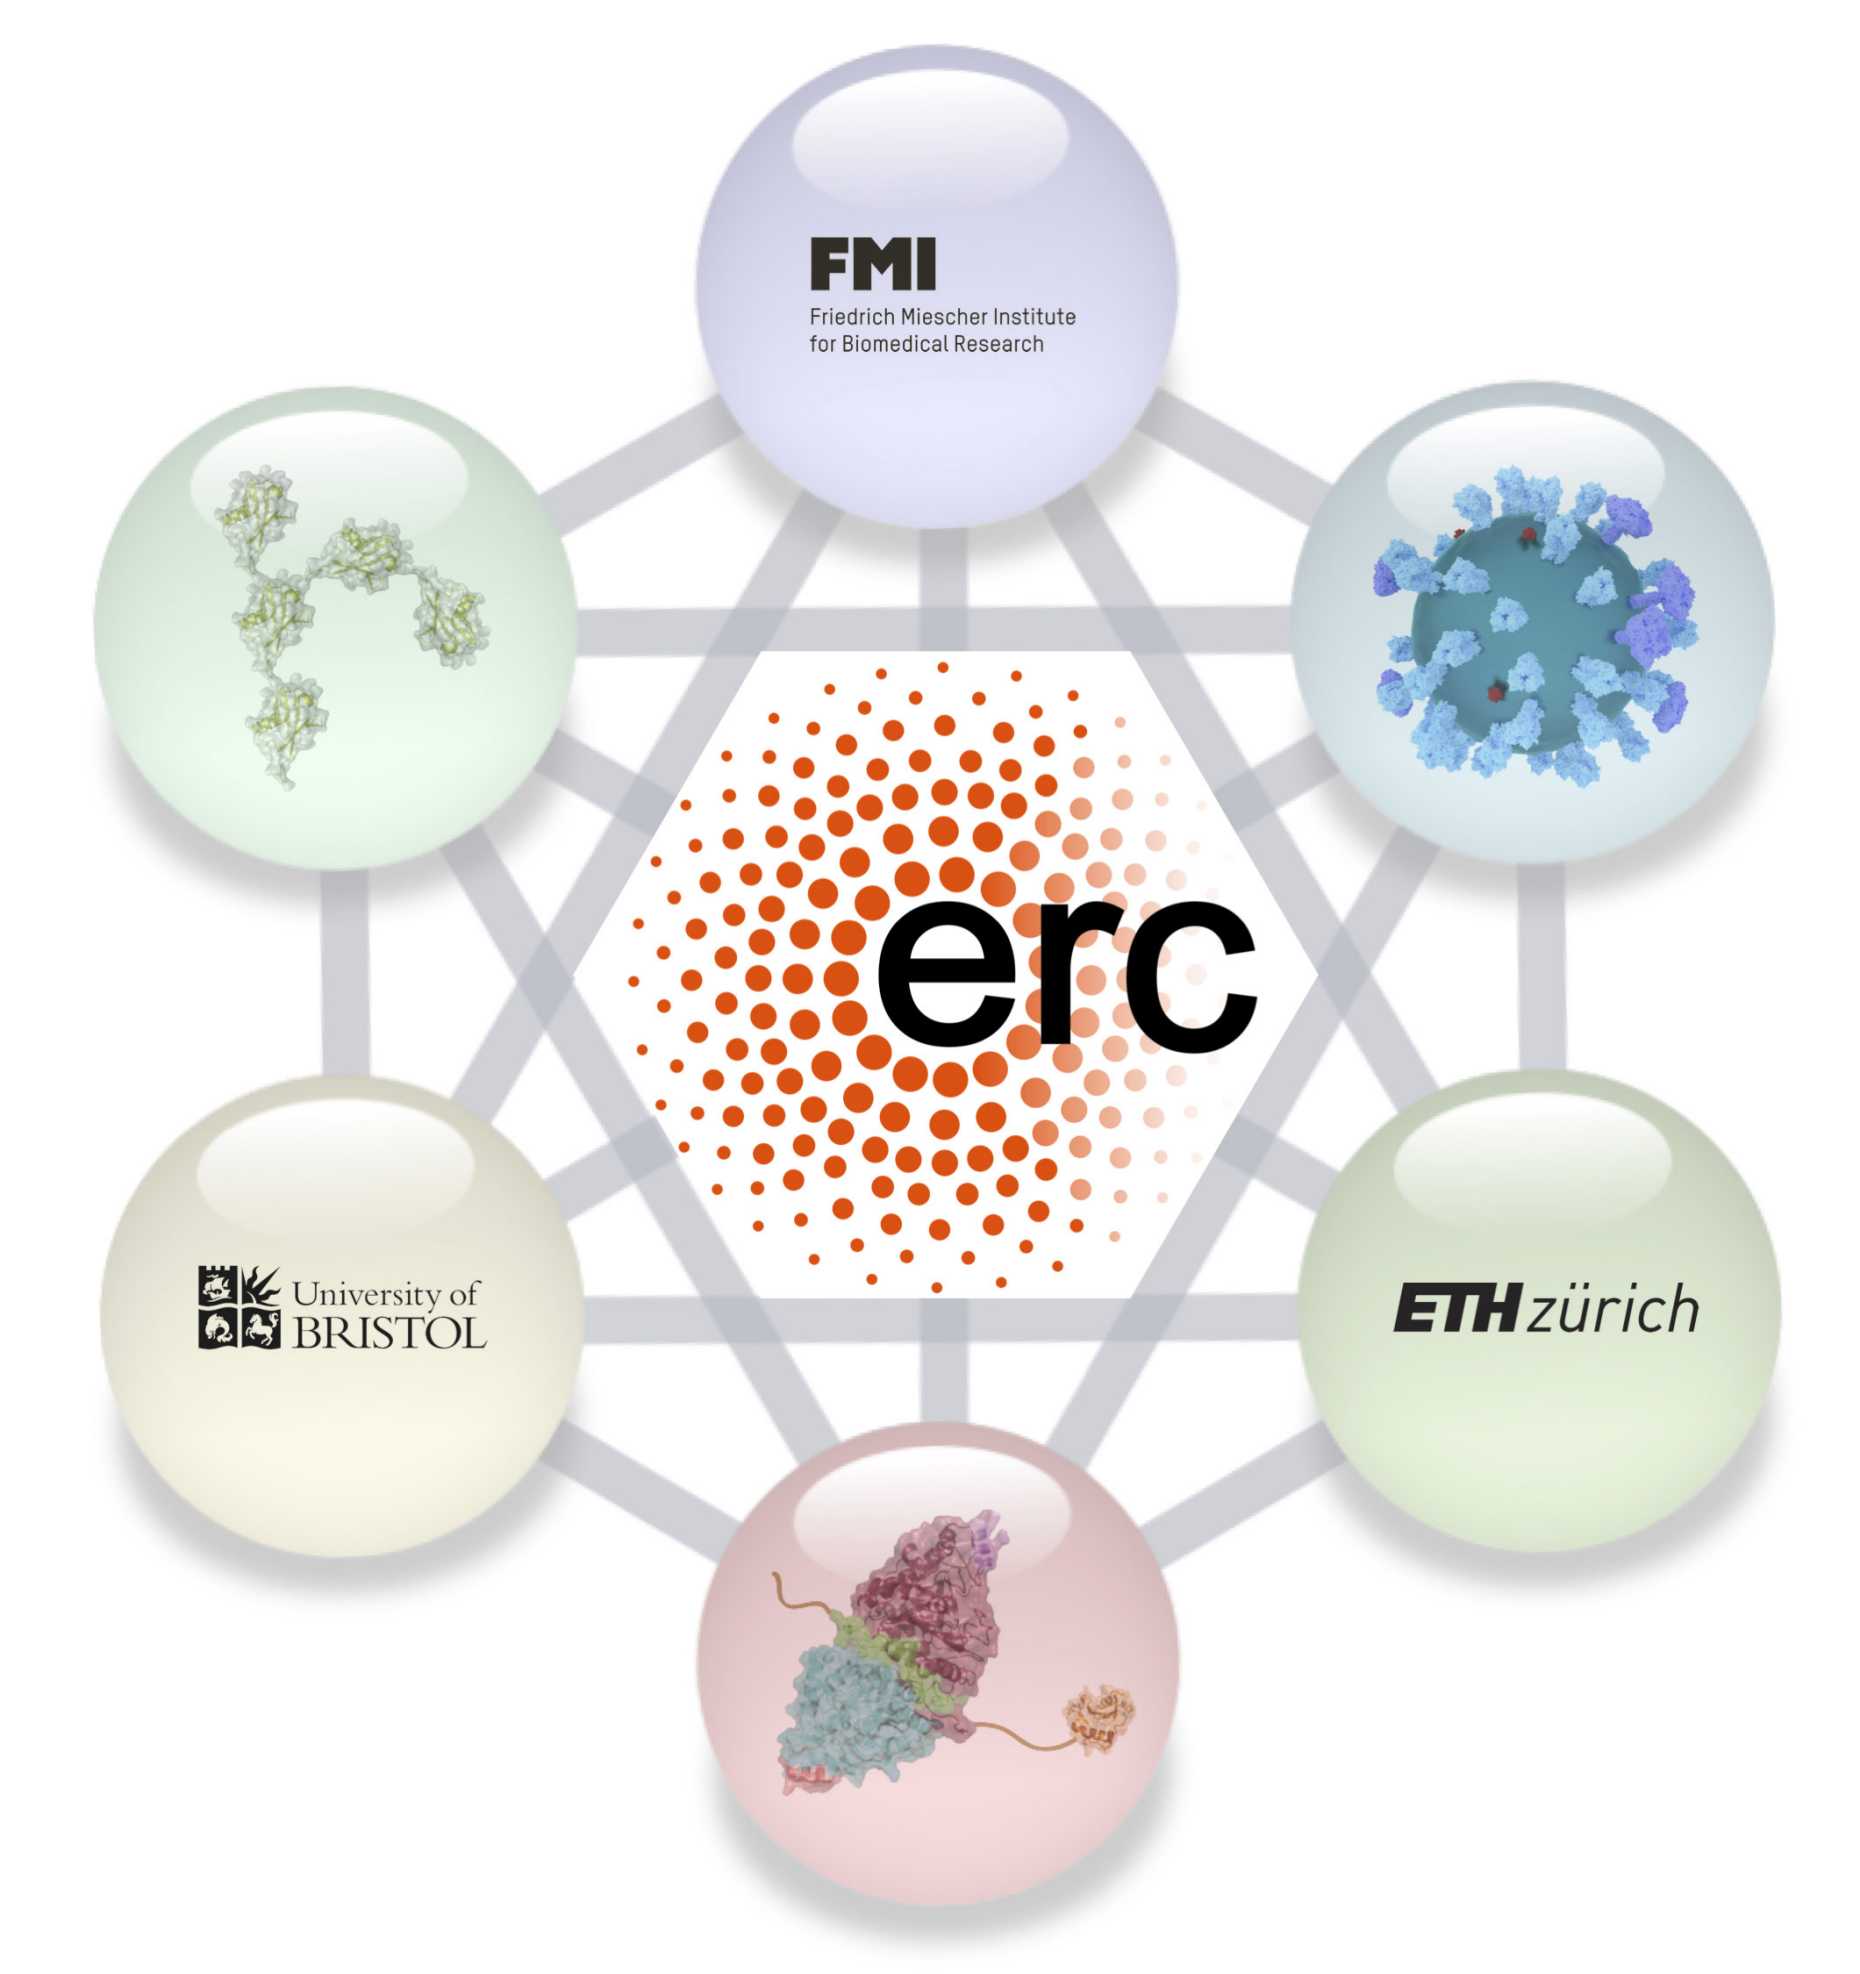 The funding of the ERC Synergy Grant amounts to 7.6 million euros